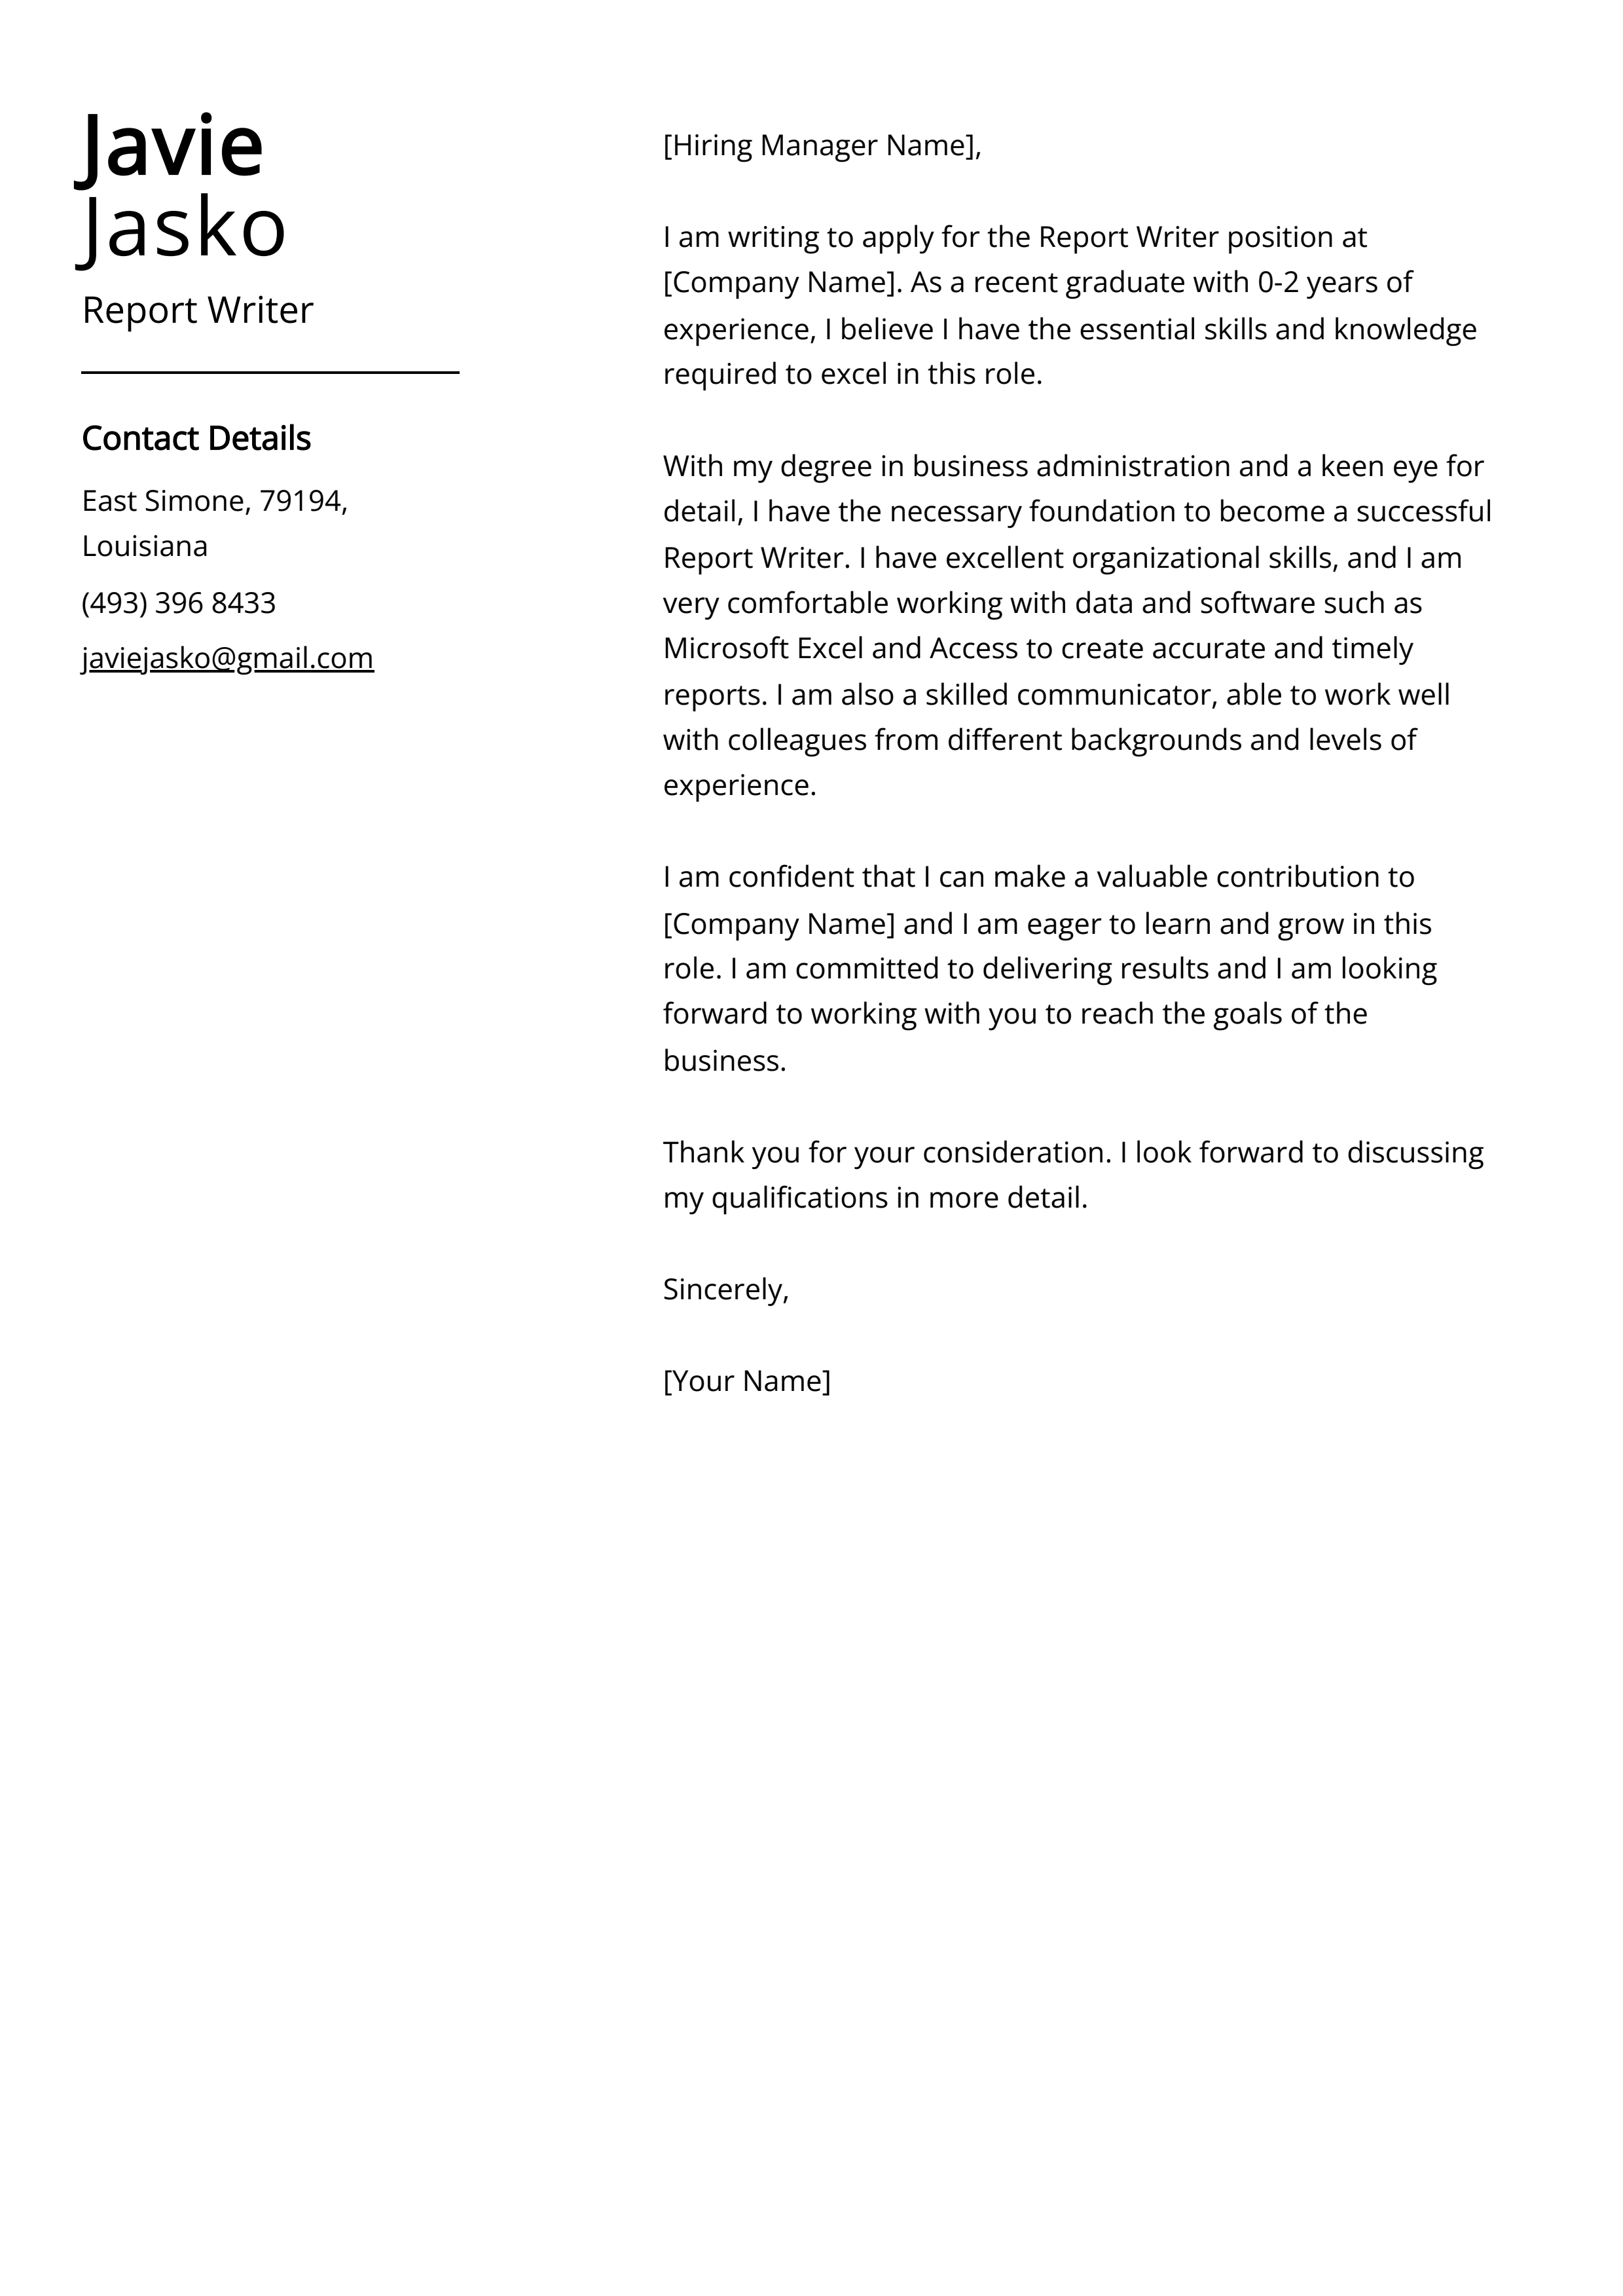 Report Writer Cover Letter Example